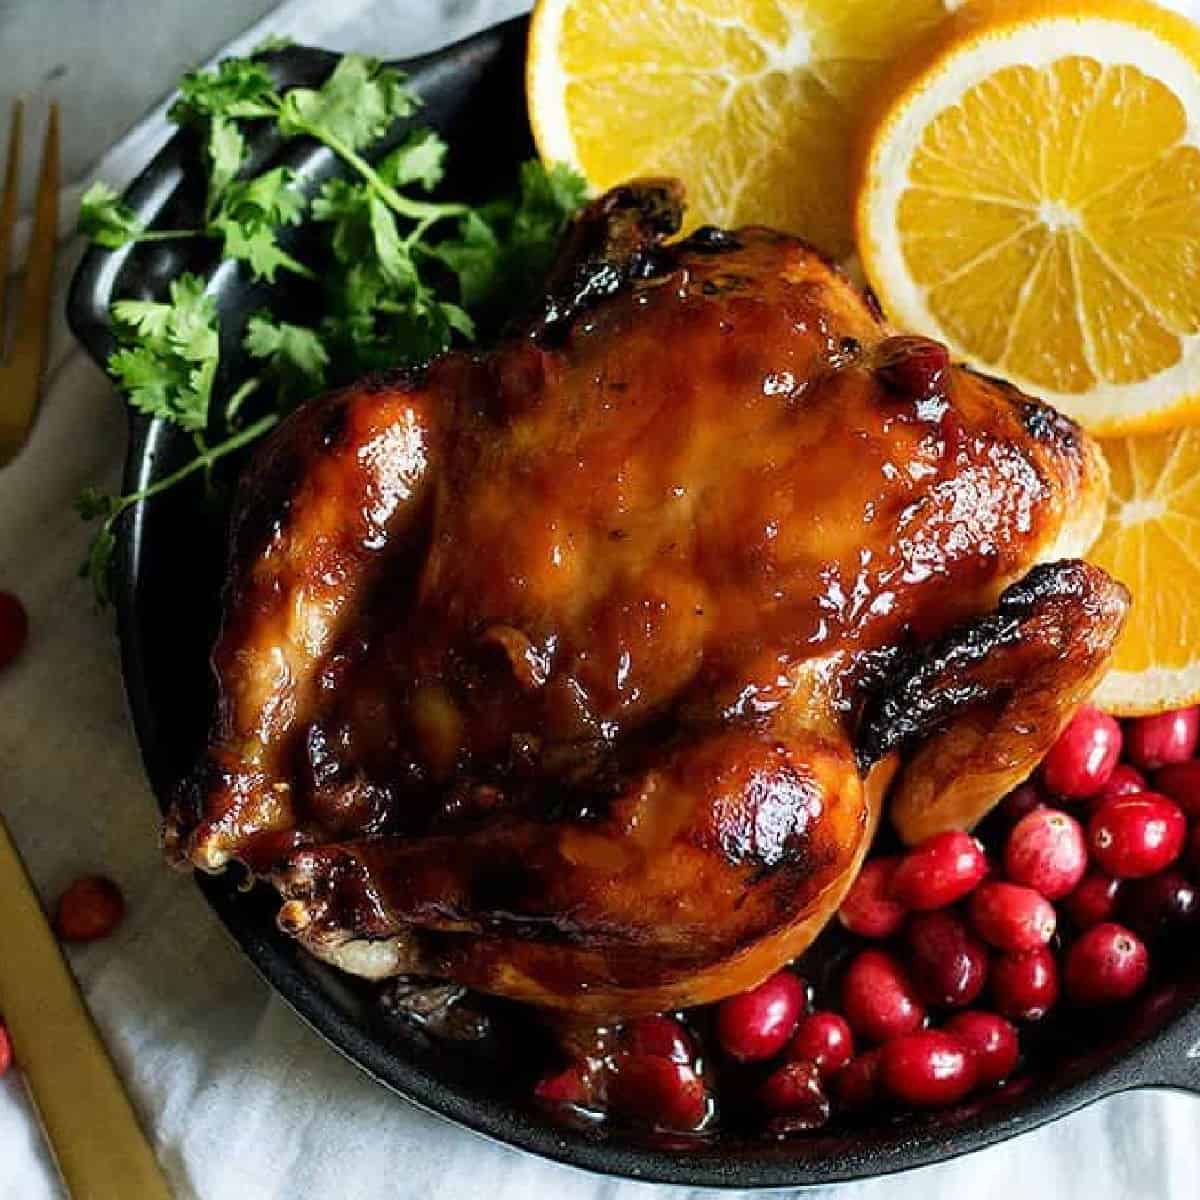 These Cranberry Orange Glazed Cornish Hens are perfect for holiday family dinners. The flavors of cranberries and oranges make this festive dinner a winner!
